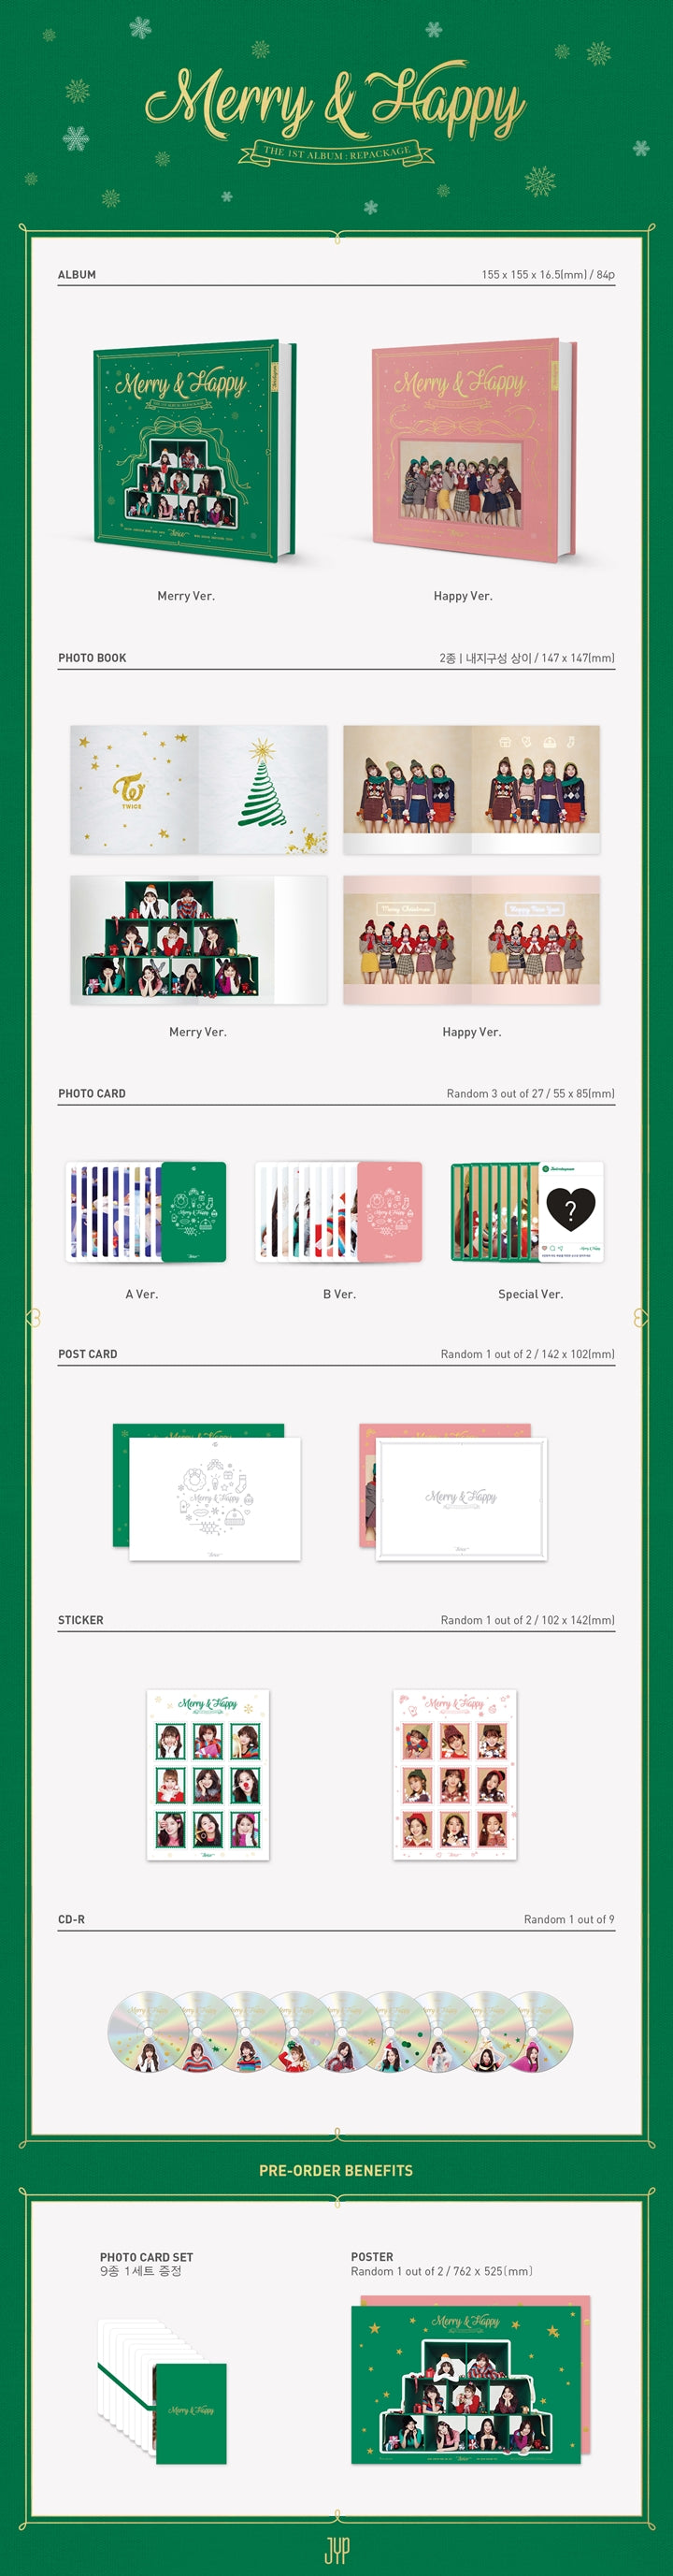 1 CD
1 Photo Book
3 Photo Cards (random out of 27 types)
1 Post Card (random out of 2 types)
1 Sticker (random out of 2 ty...